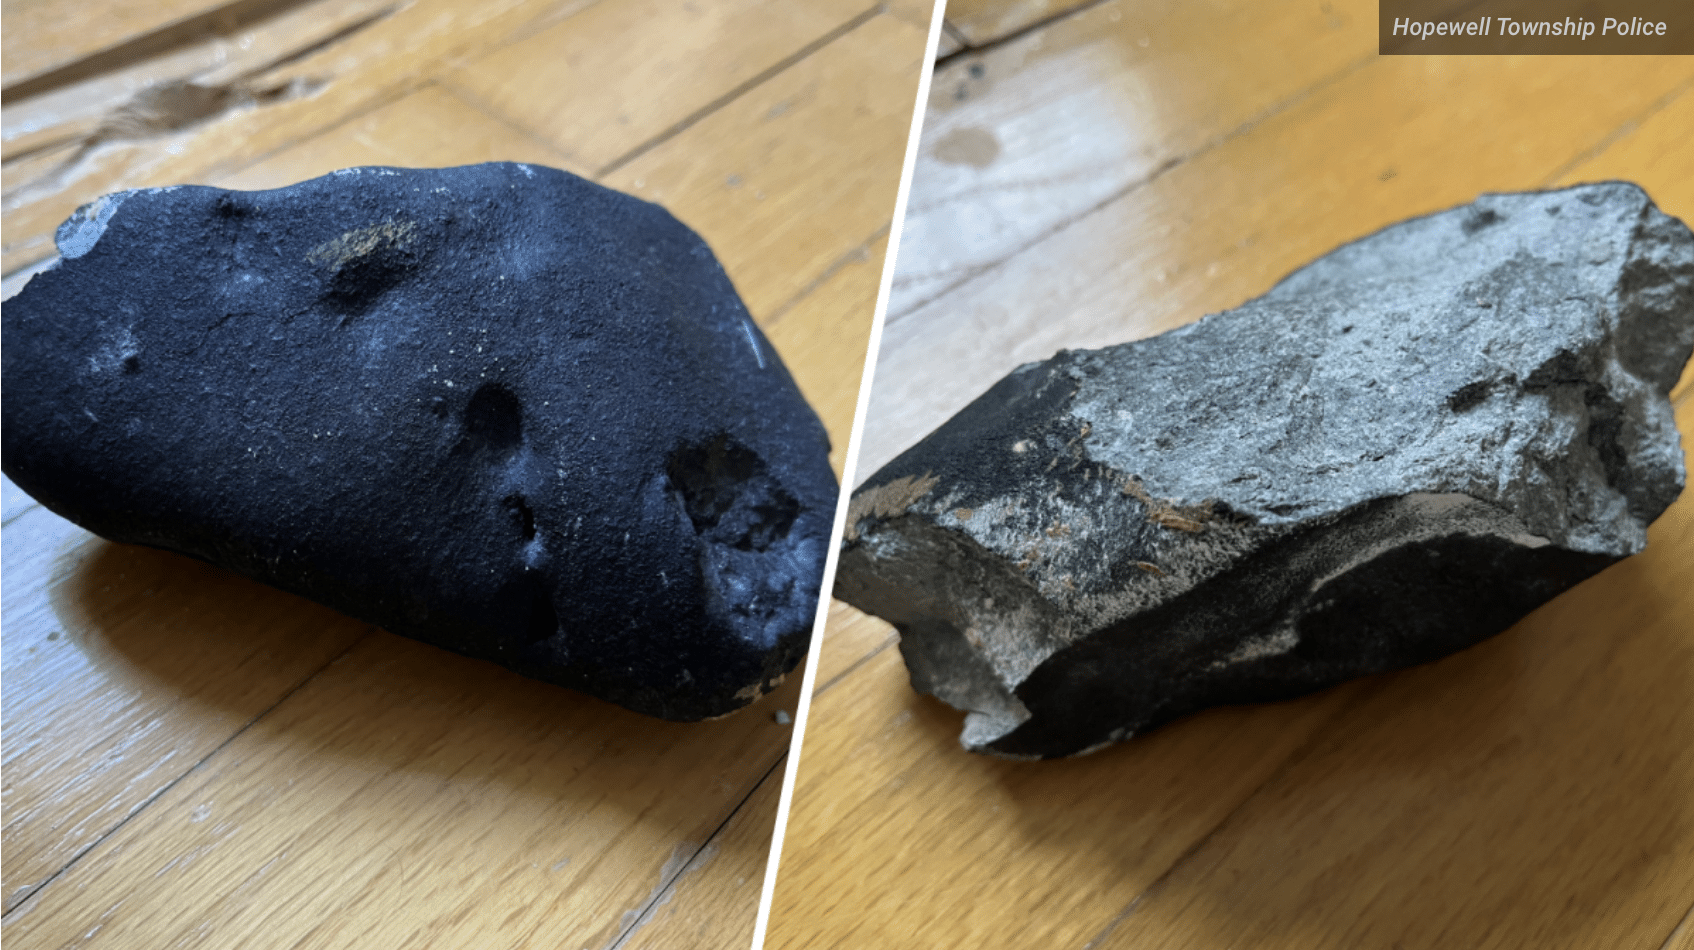 A meteorite has just struck a home in New Jersey